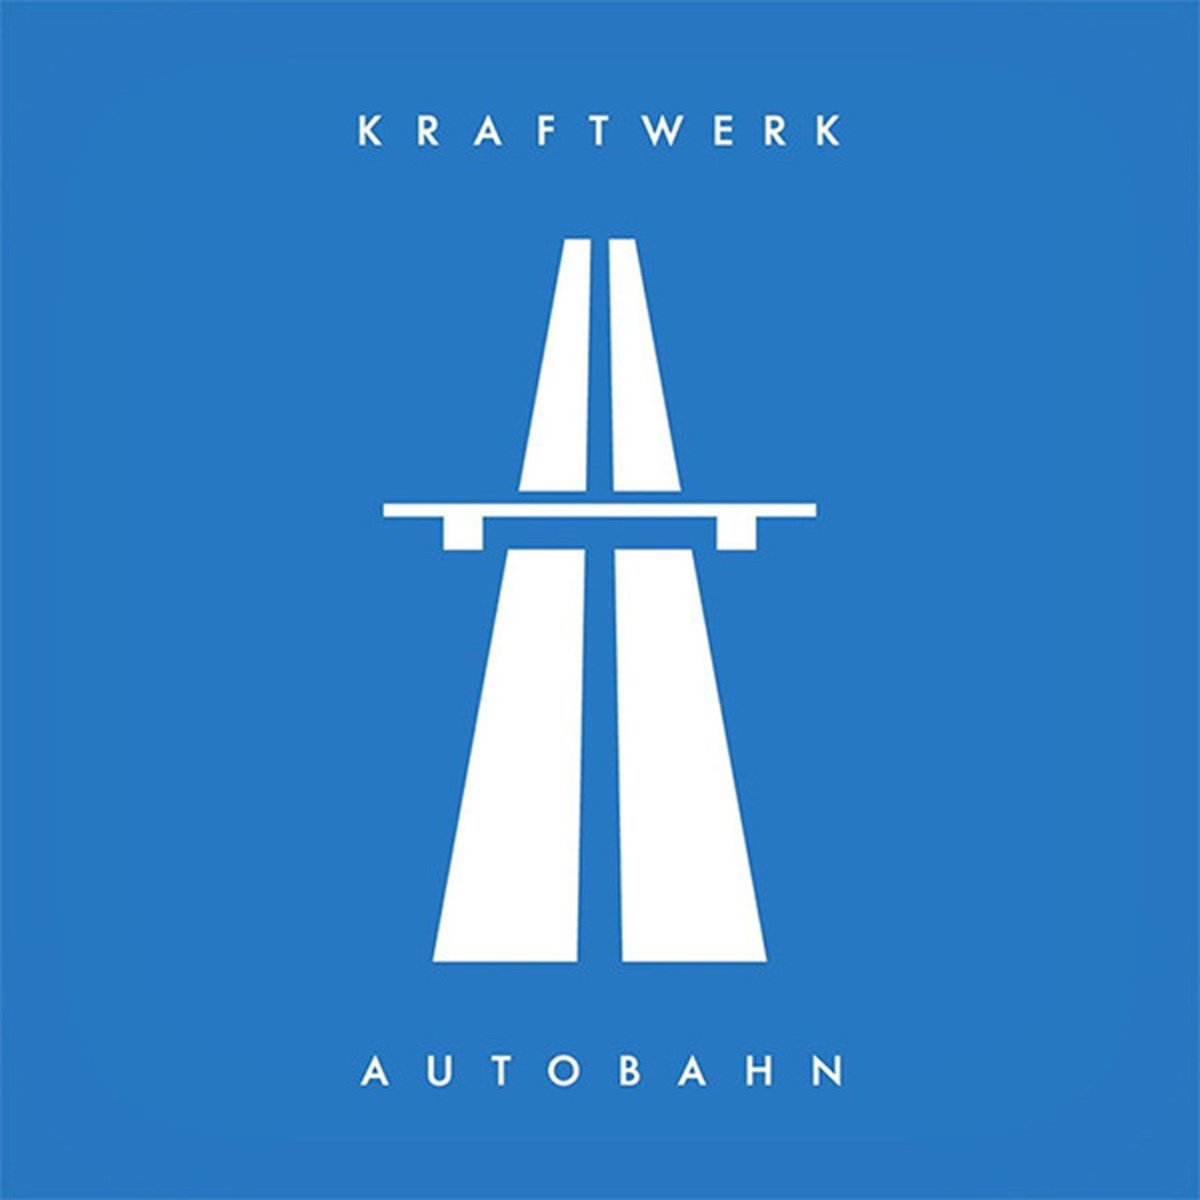 Name an album with a predominantly blue album cover. My pick: Autobahn